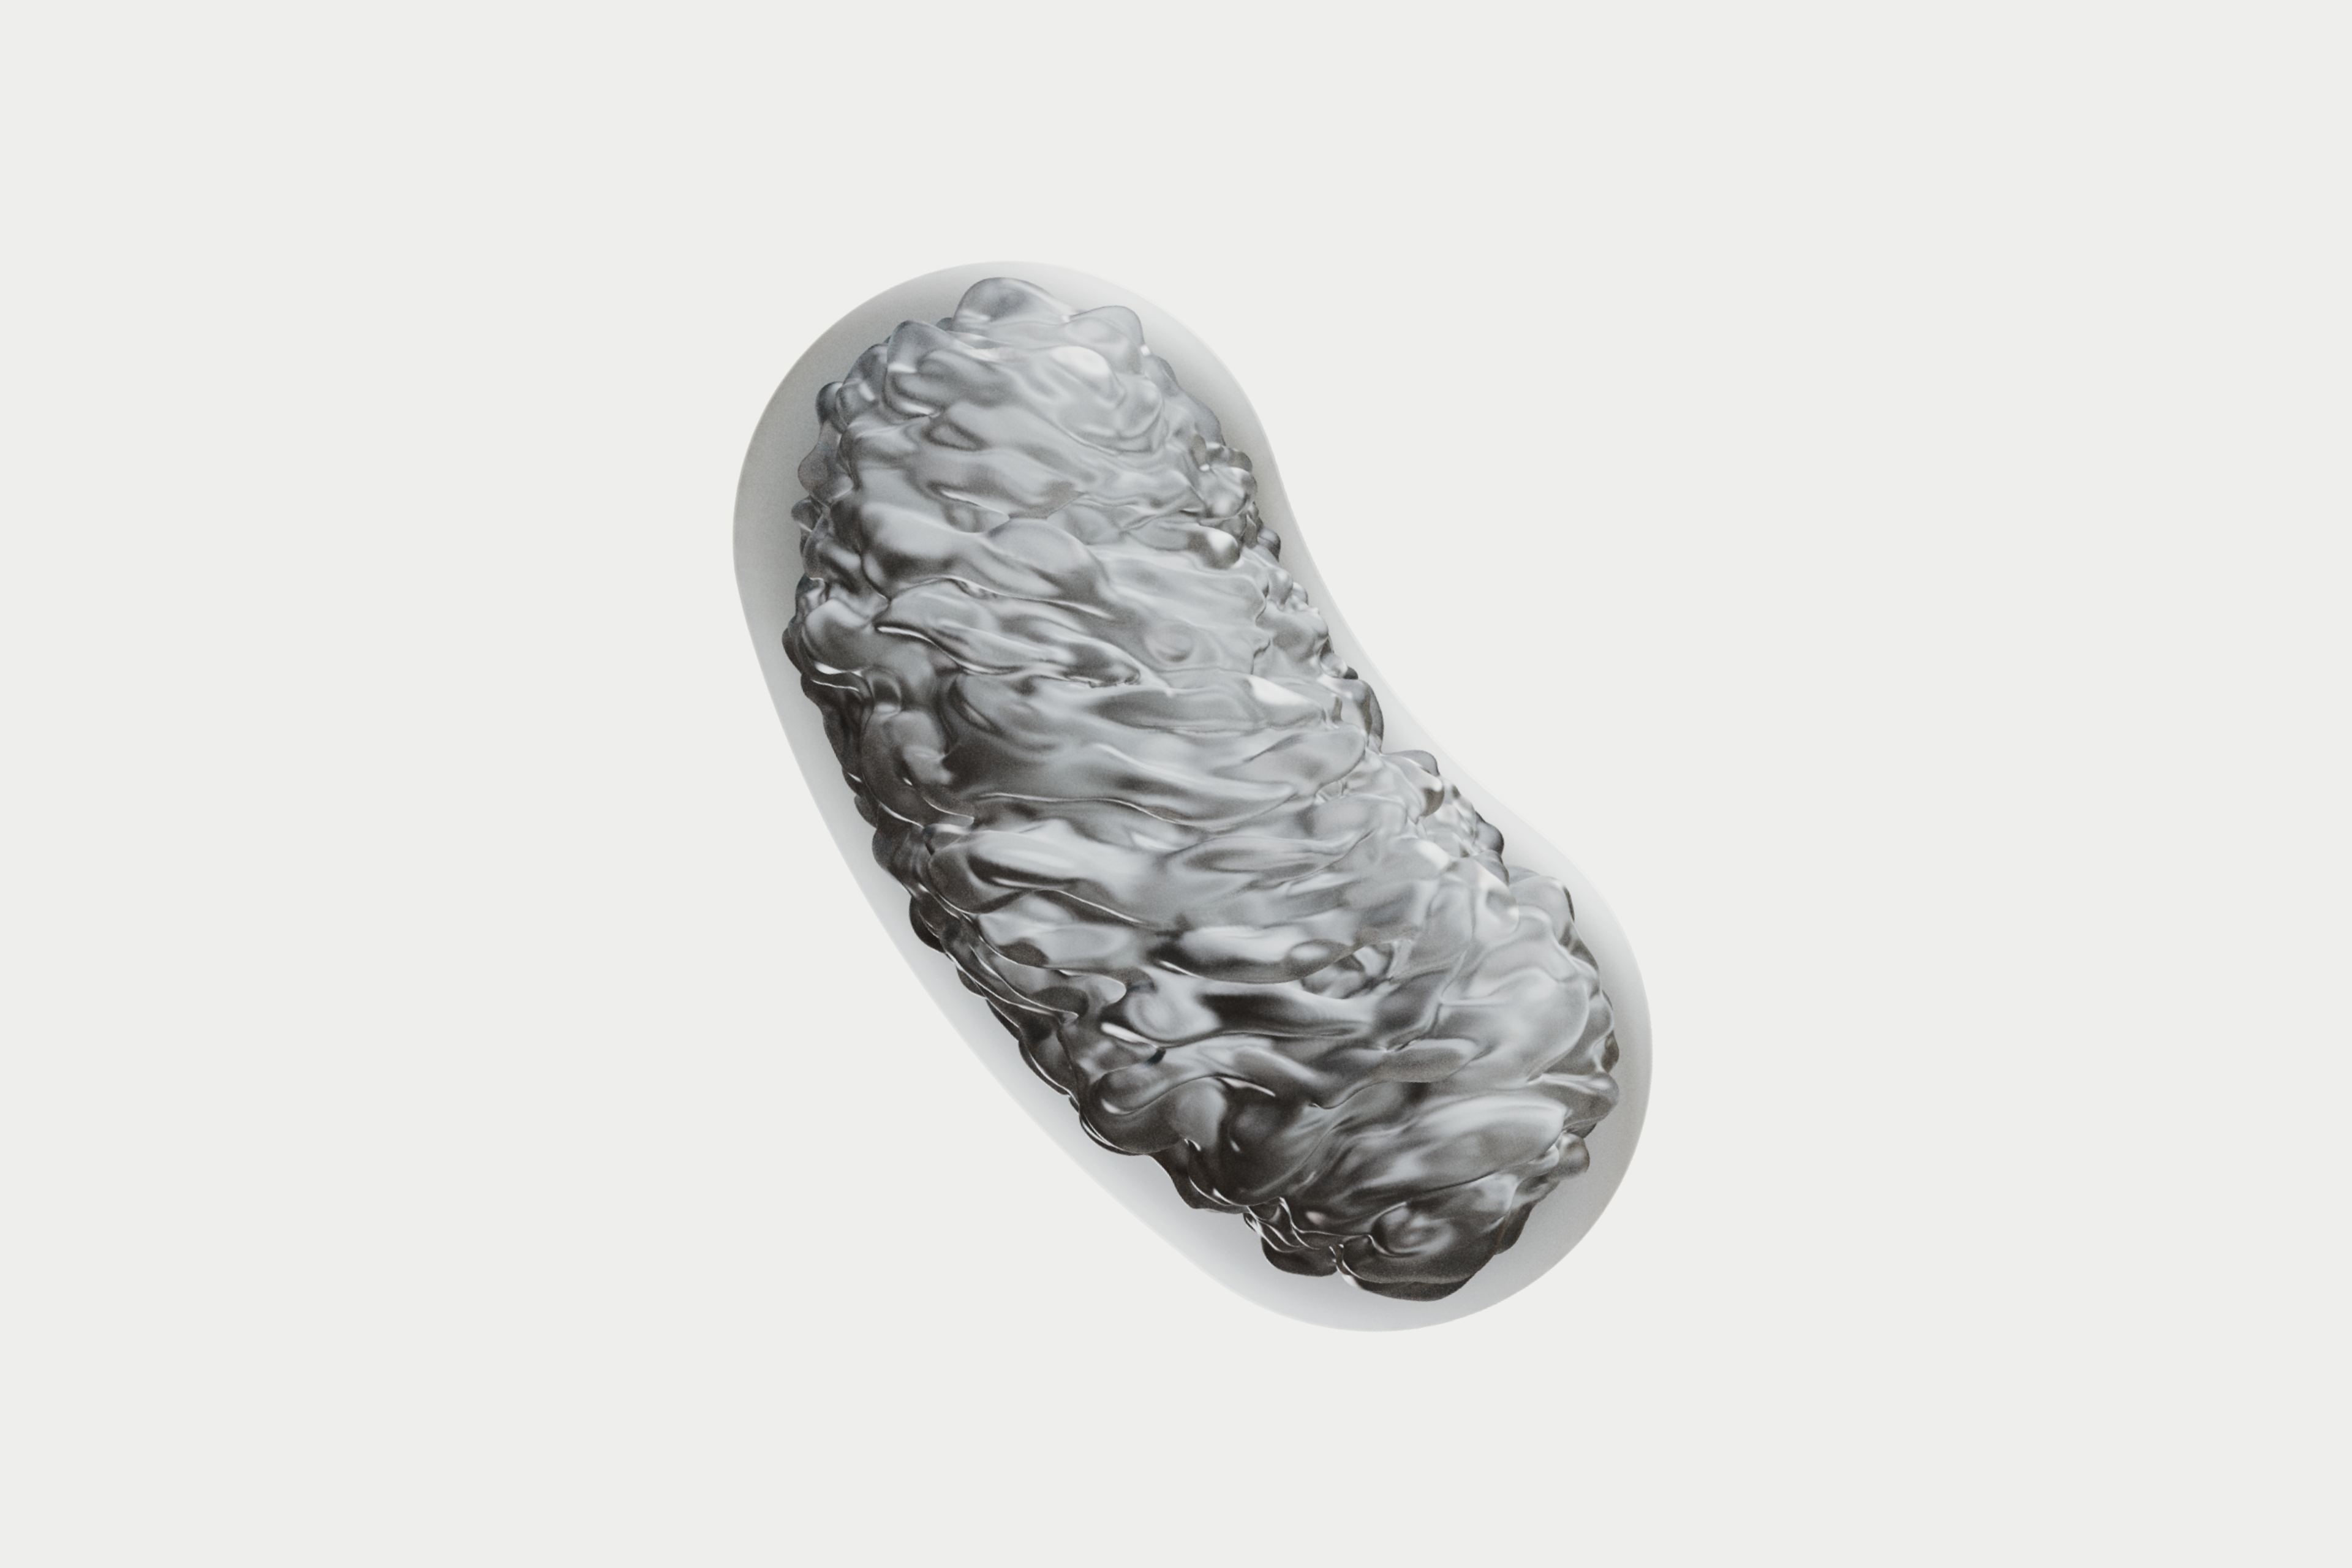 Dysfunctional mitochondrion